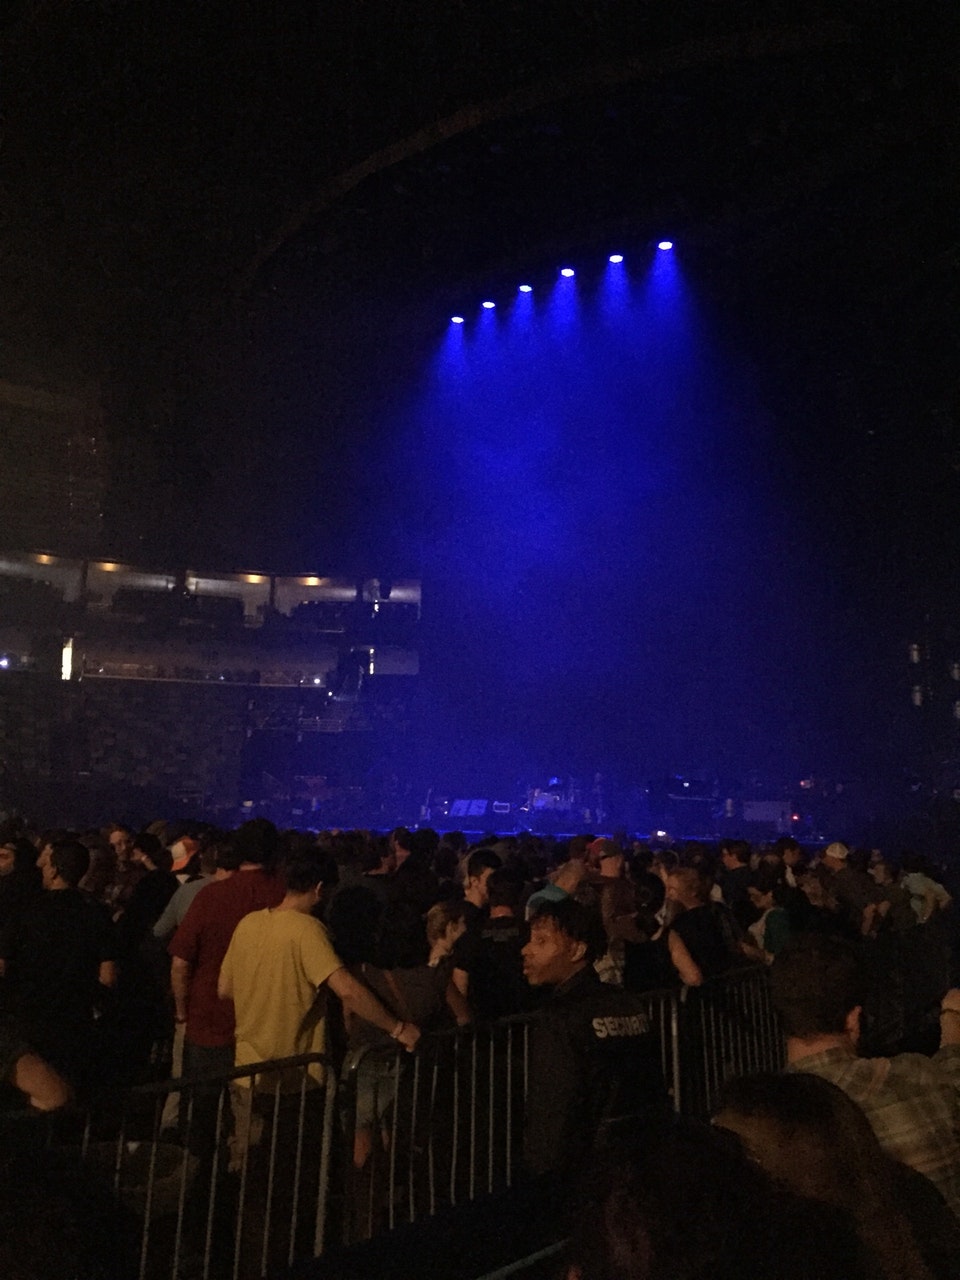 section 101, row 4 seat view  for concert - smoothie king center